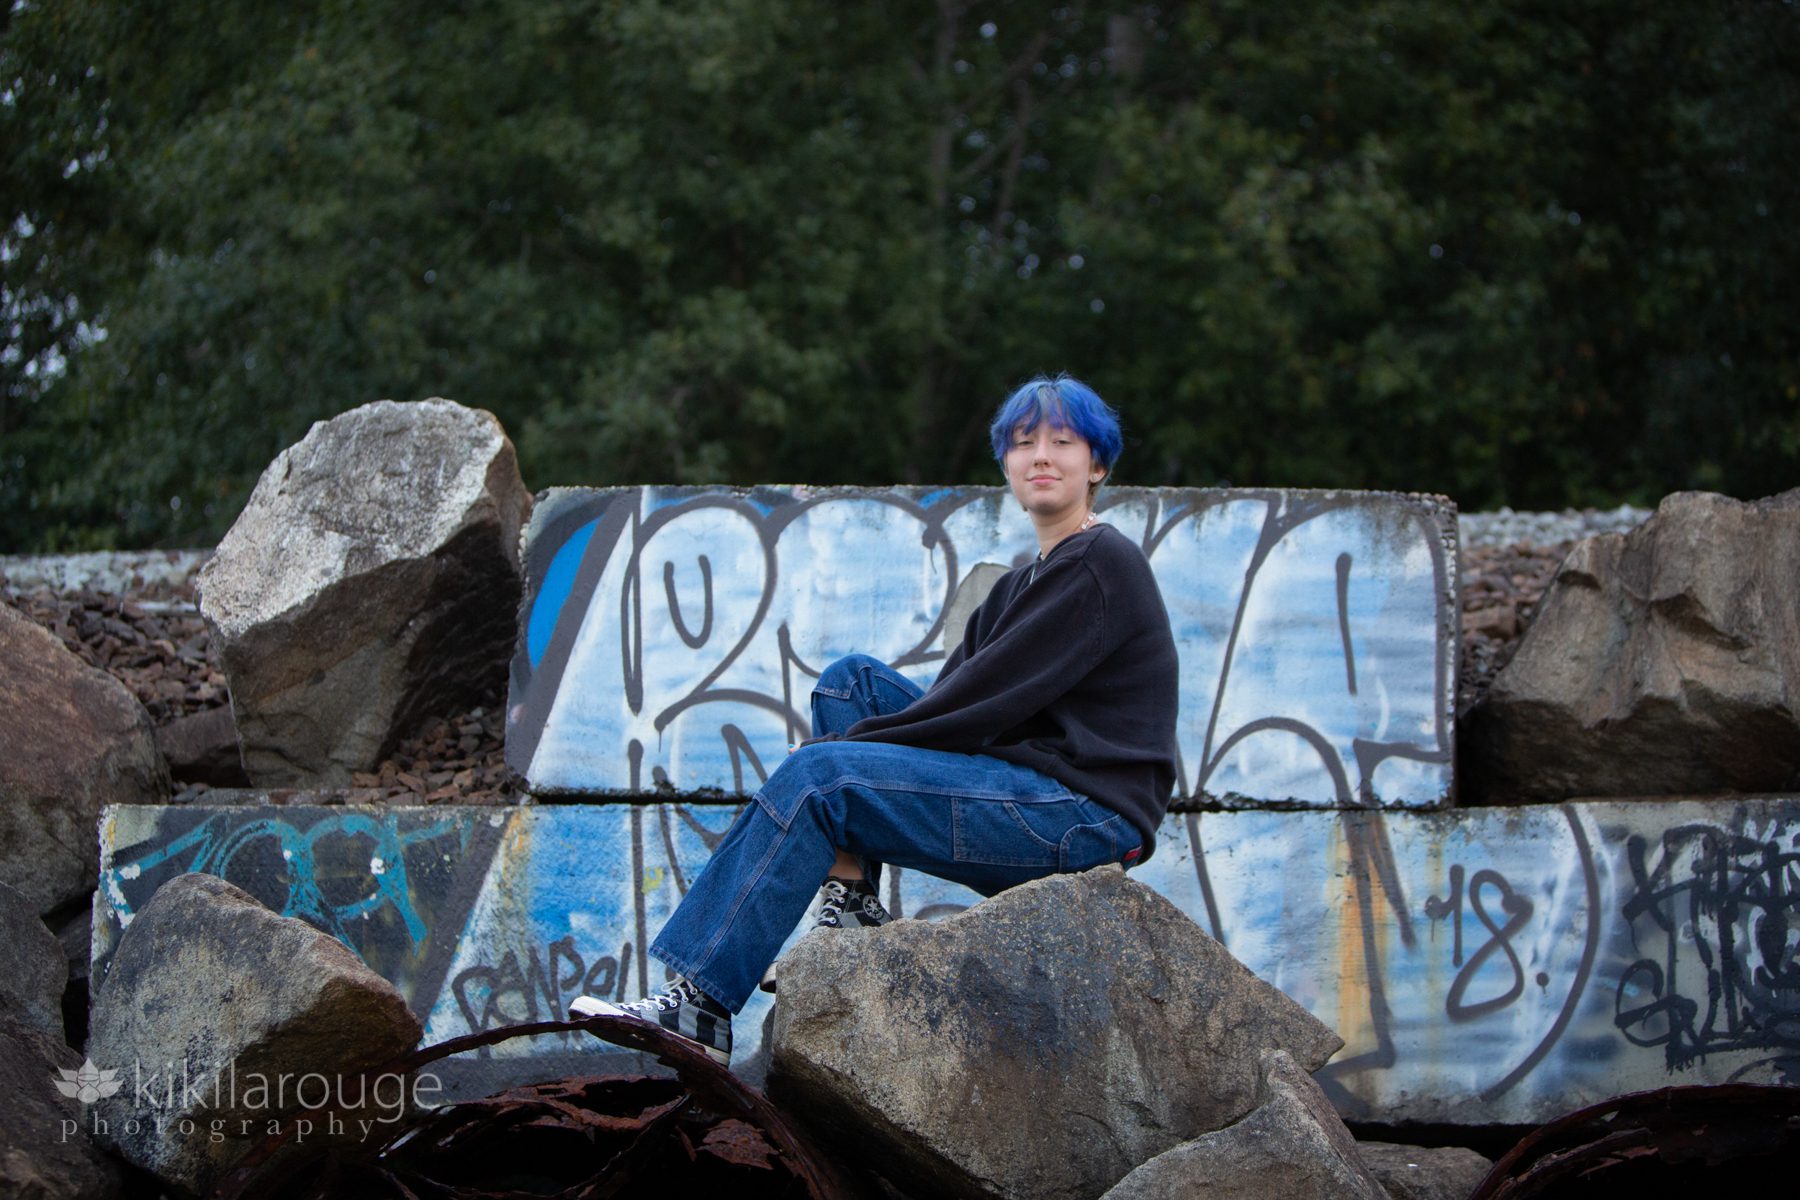 Teen with blue hair sitting on rocks in front to blue graffiti on train tracks behind